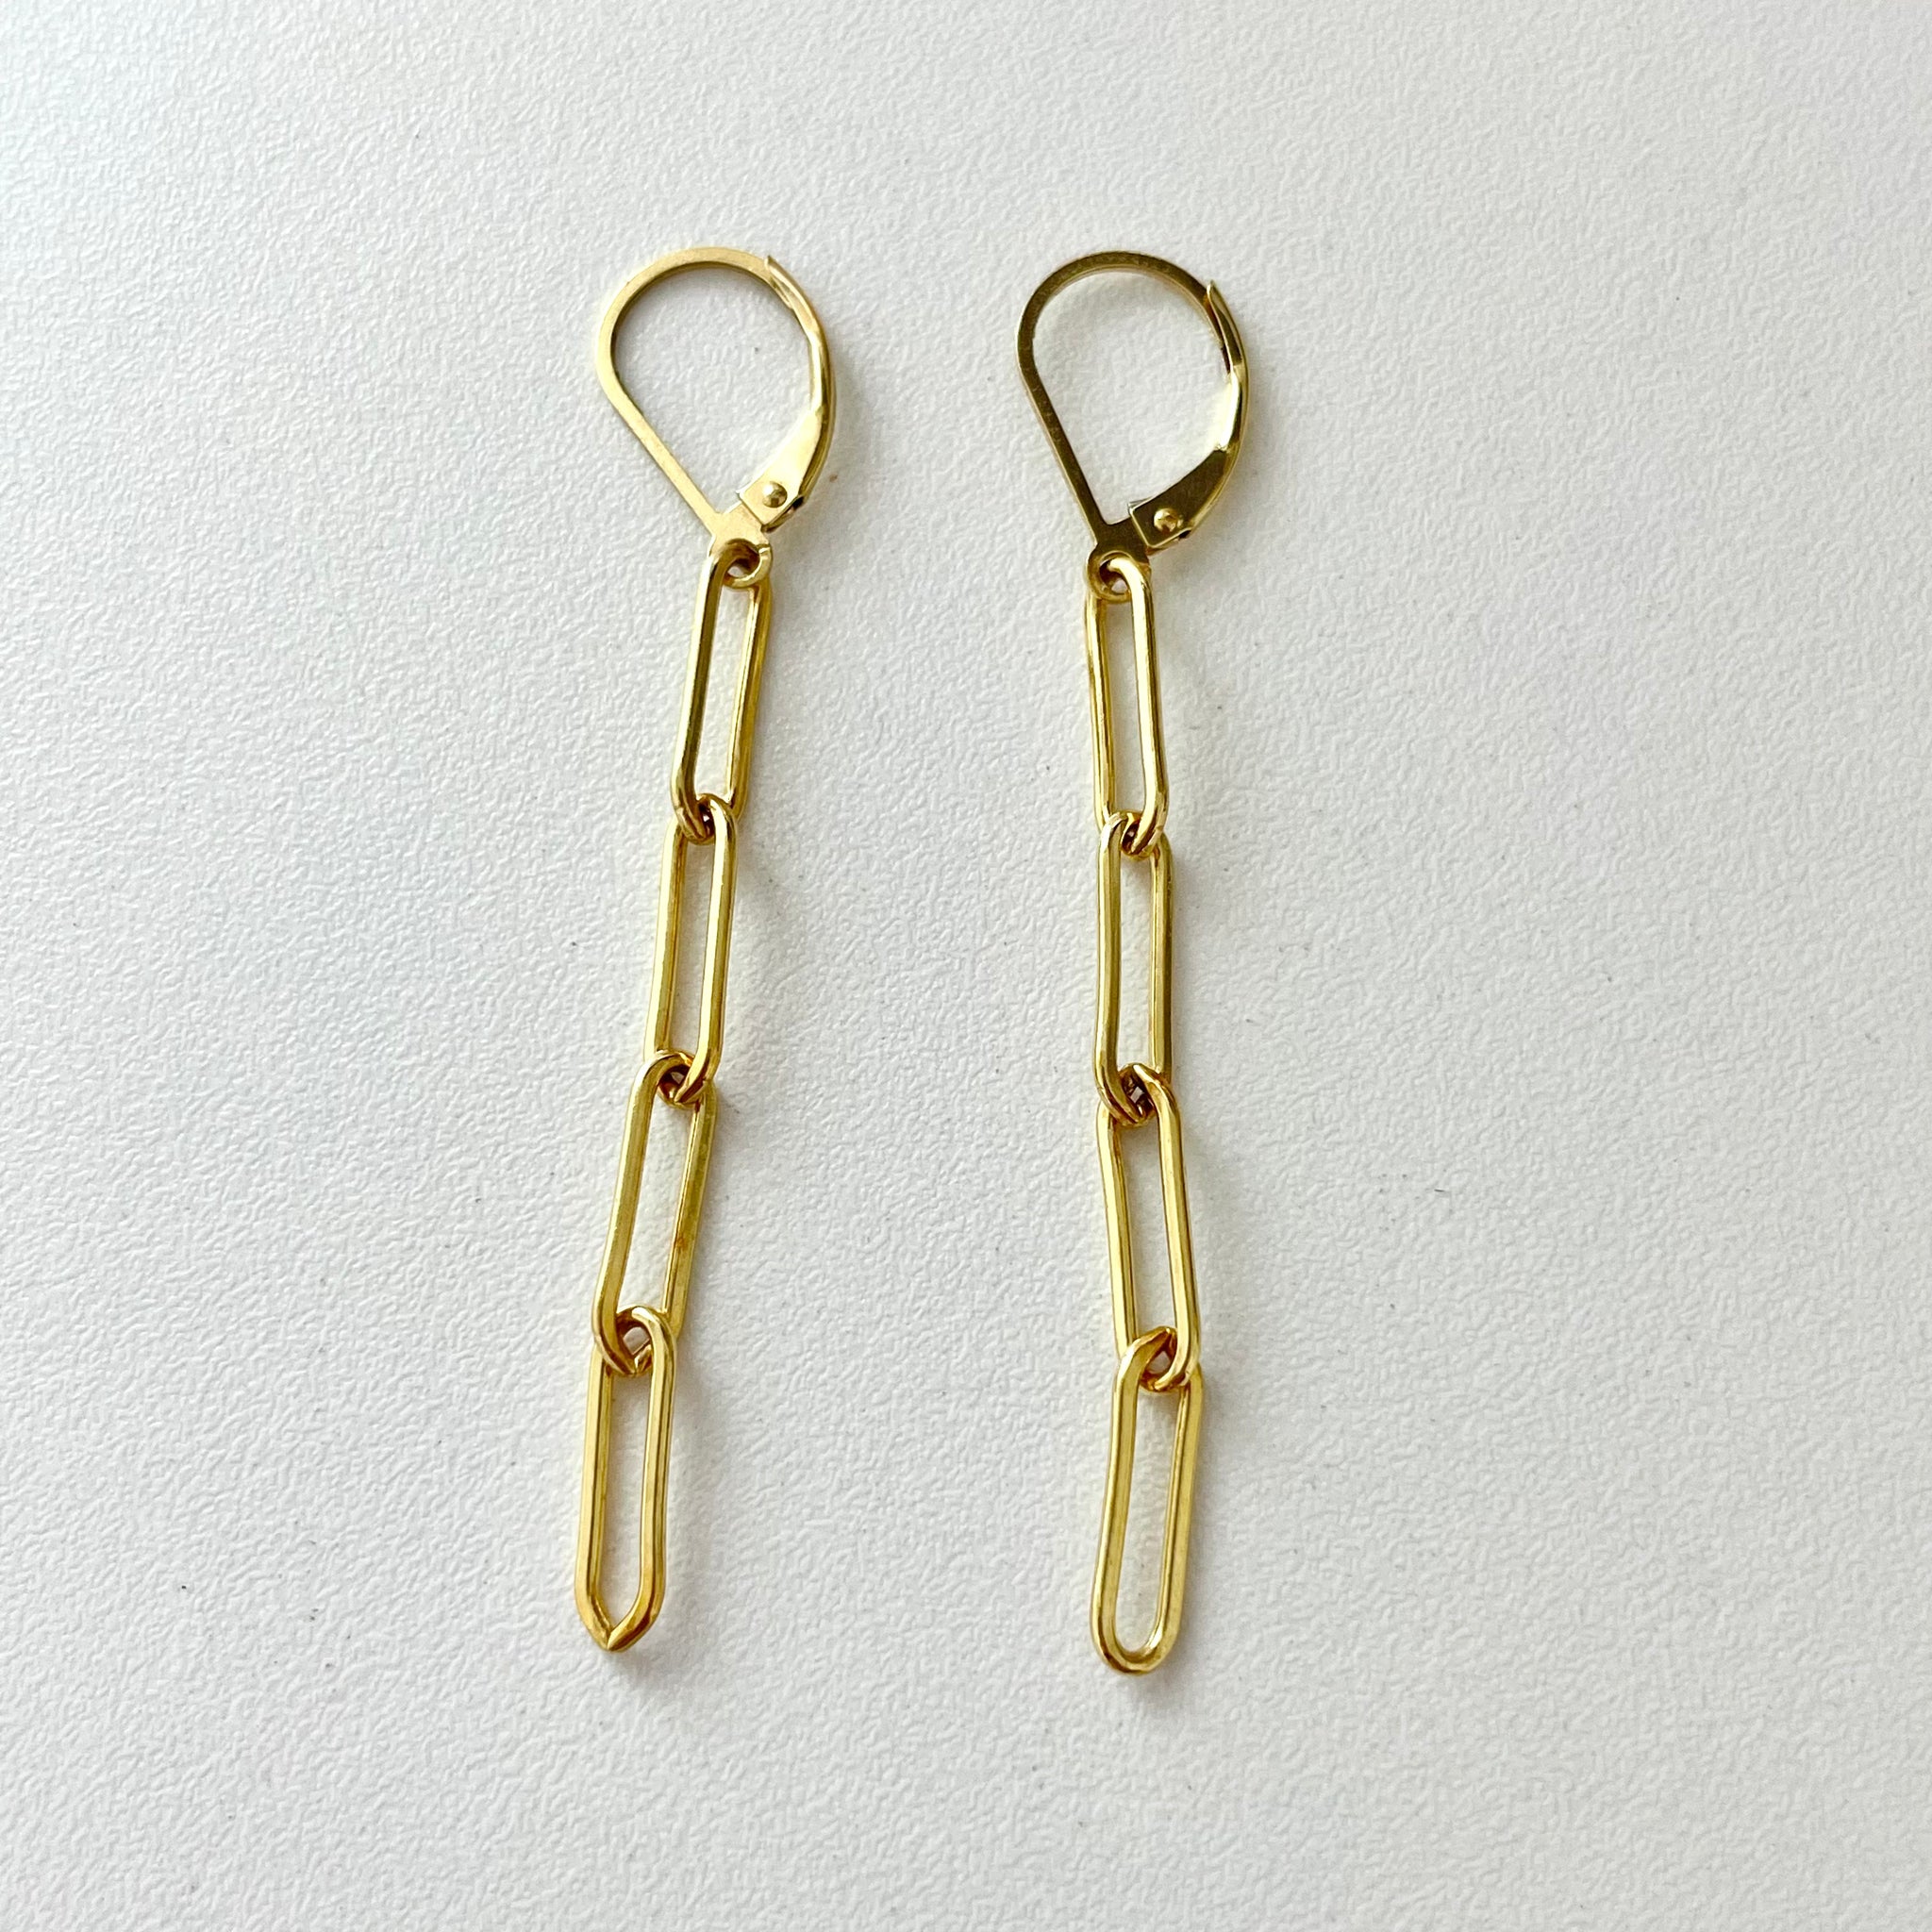 1356 - Gold Paperclip Leverback Earrings